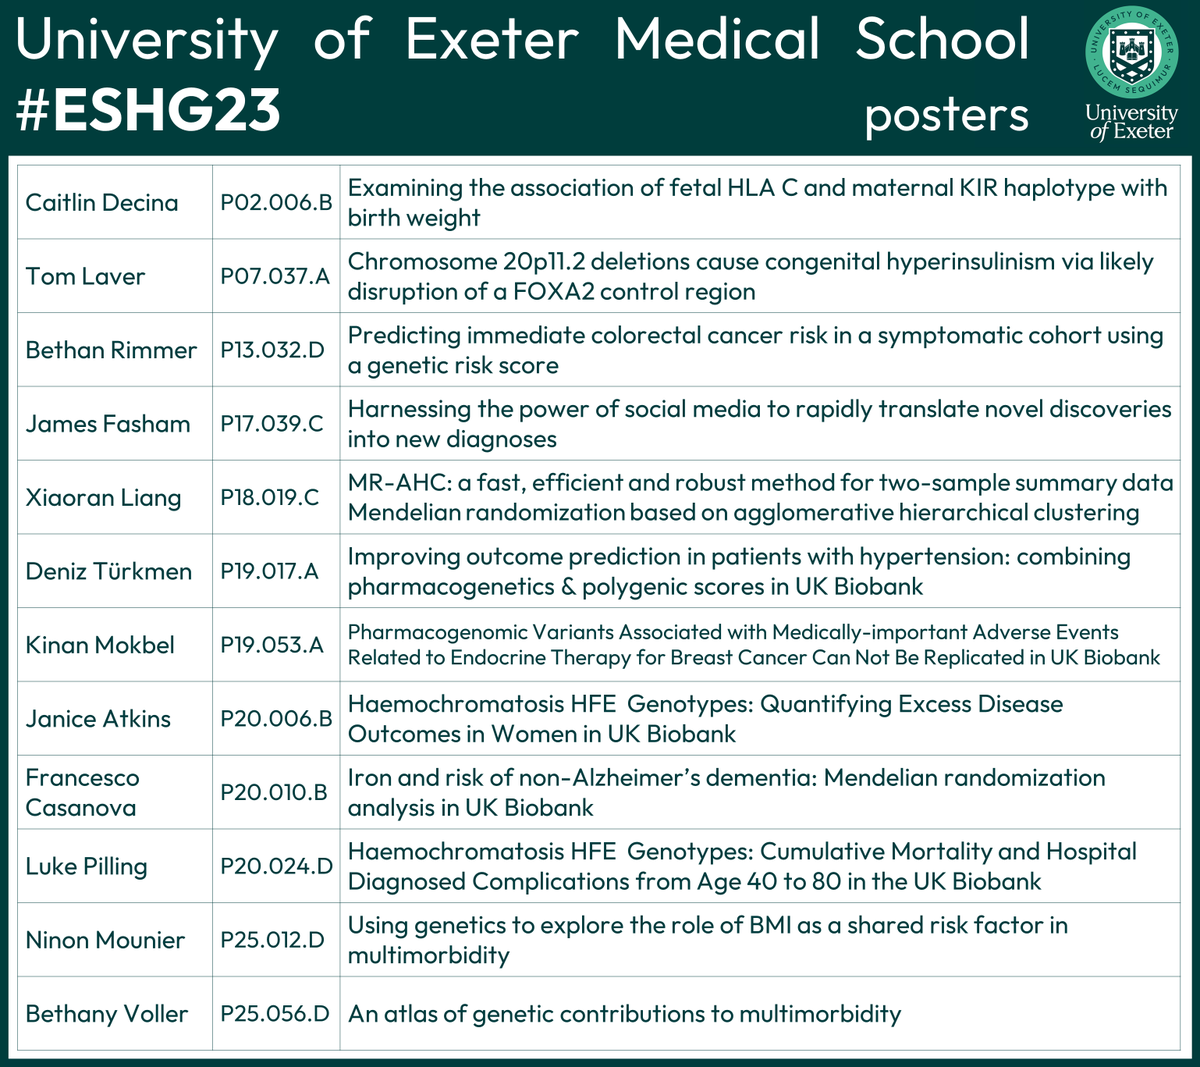 🗣️11 talks and 12 posters by @ExeterMed colleagues at this weekend's @eshgsociety 🧬 meeting in Glasgow Very excited for the science and networking... less so the 7.5hr train! 🚆 #ESHG #ESHG23 #ESHG2023 #genetics #science #health @uniofexeHLS